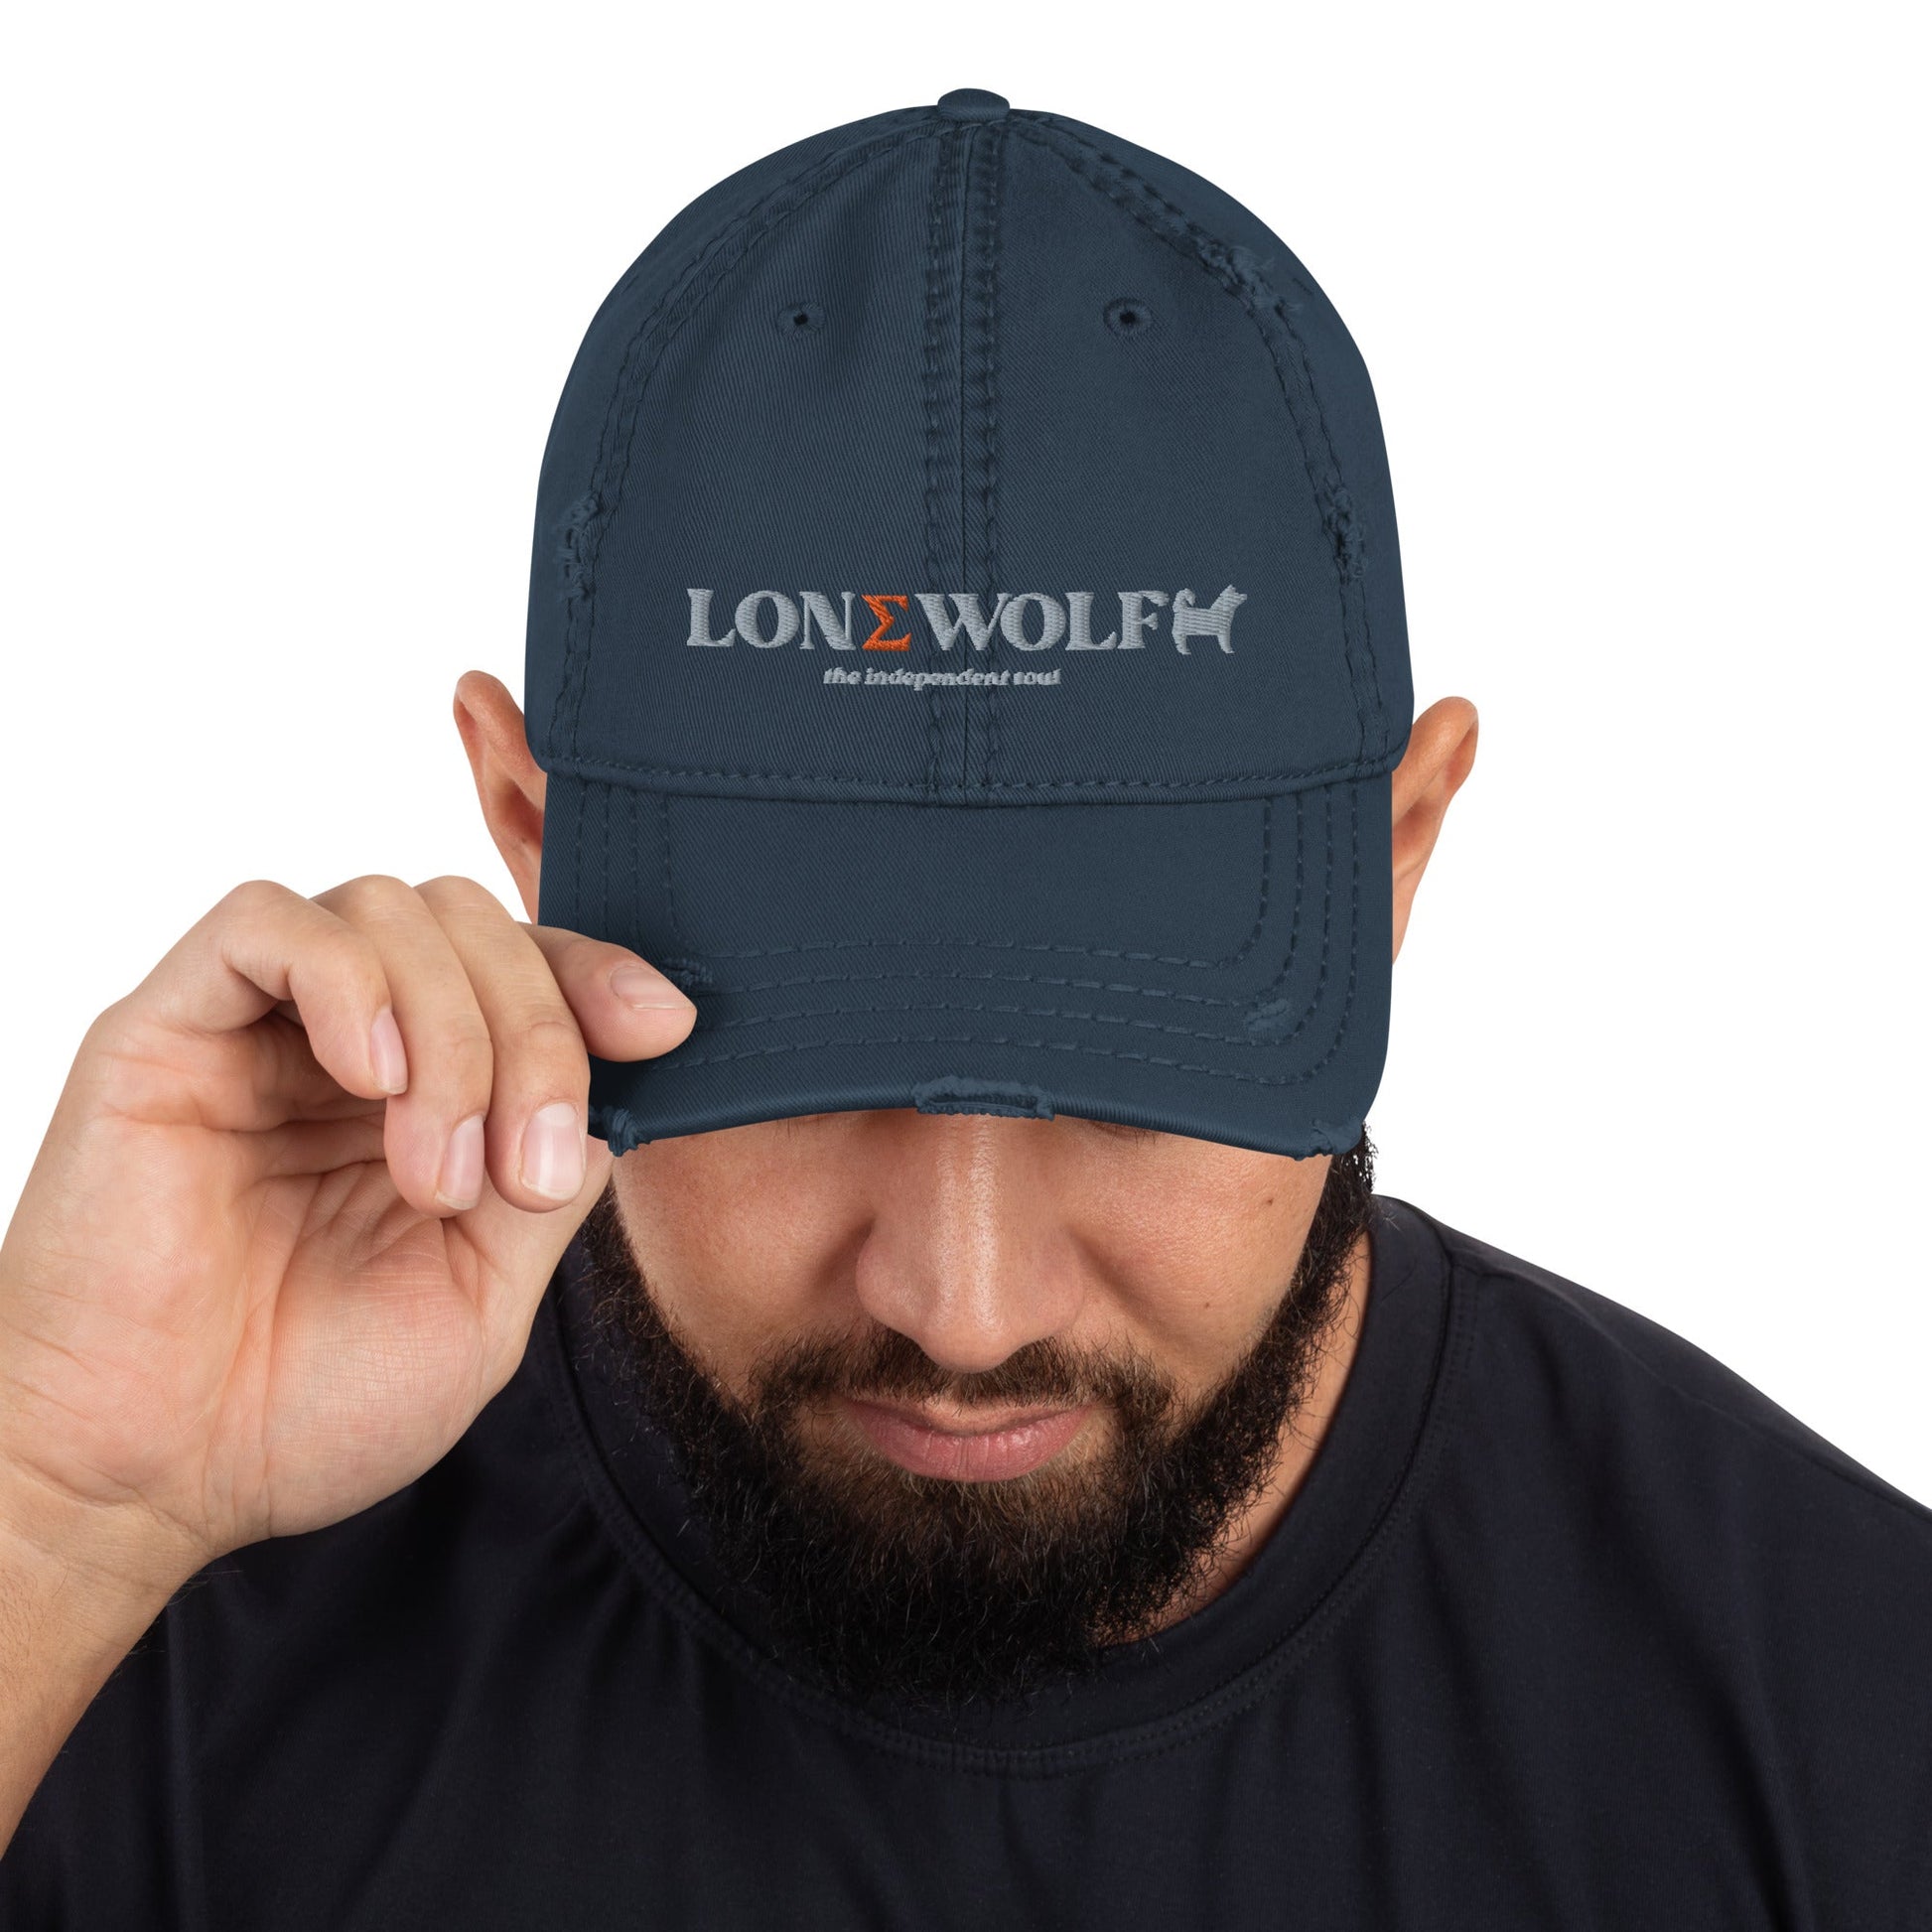 Distressed Dad Hat with Embroidered Lone Wolf Slogan - Hobbster